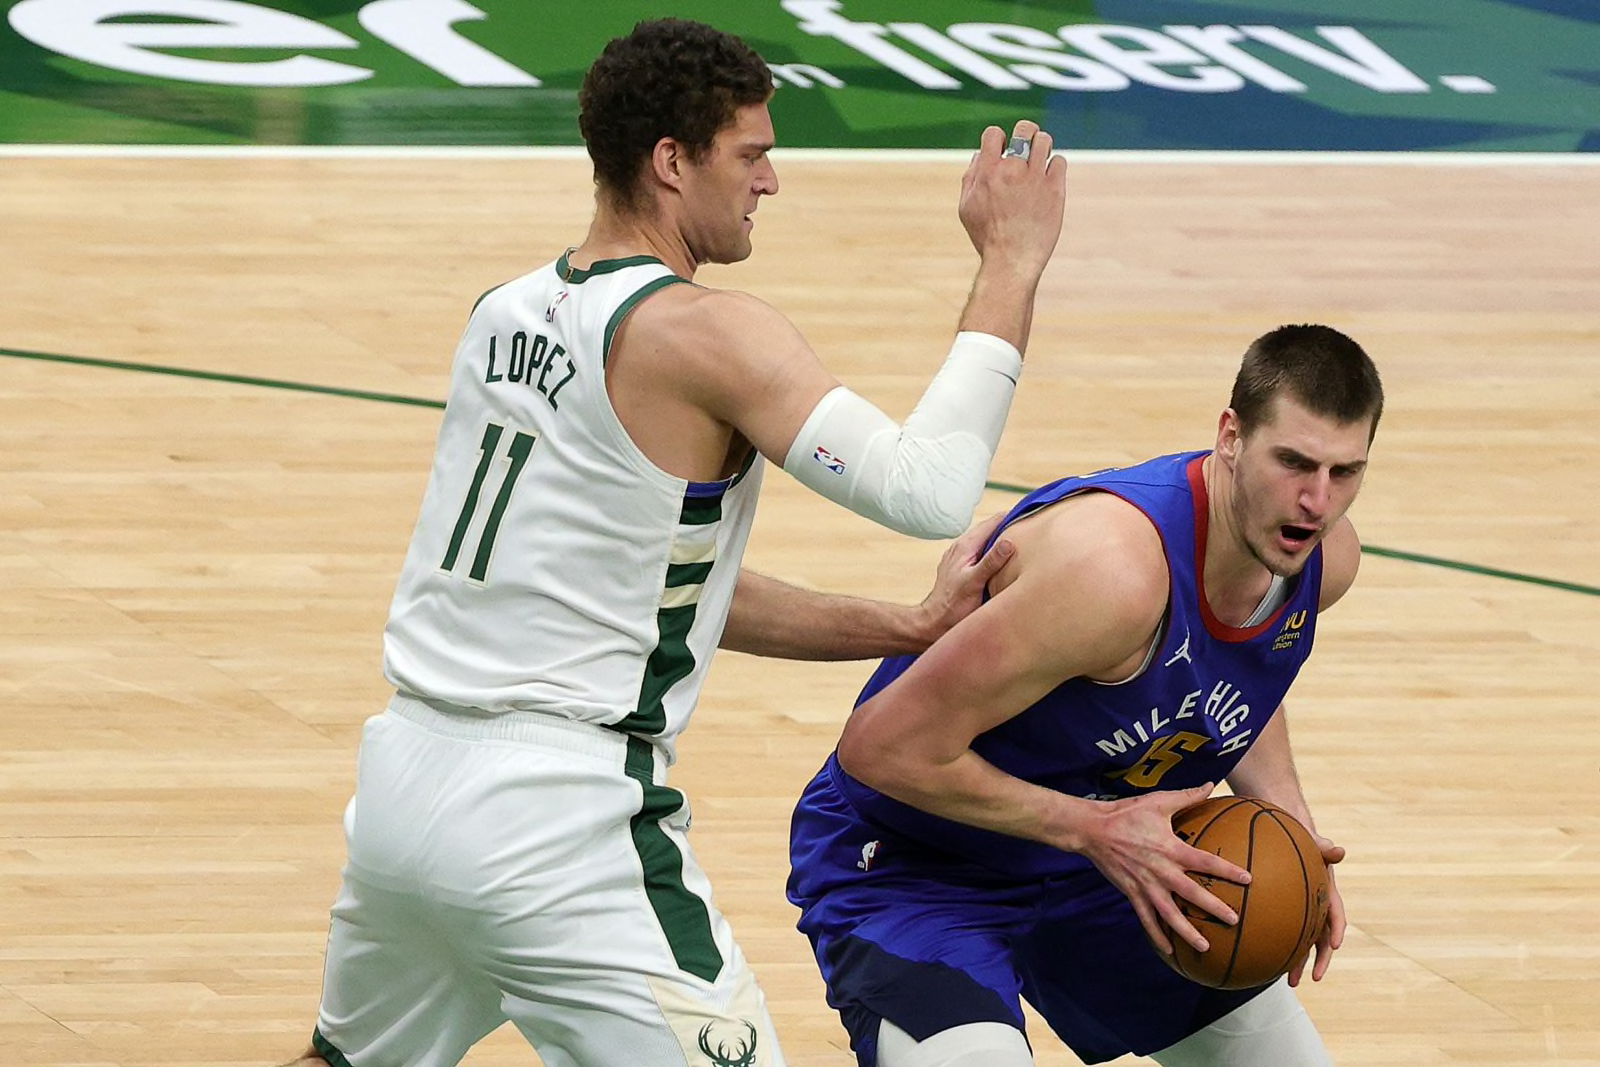 How Bucks' Brook Lopez reinvented his 3-point shot with the help